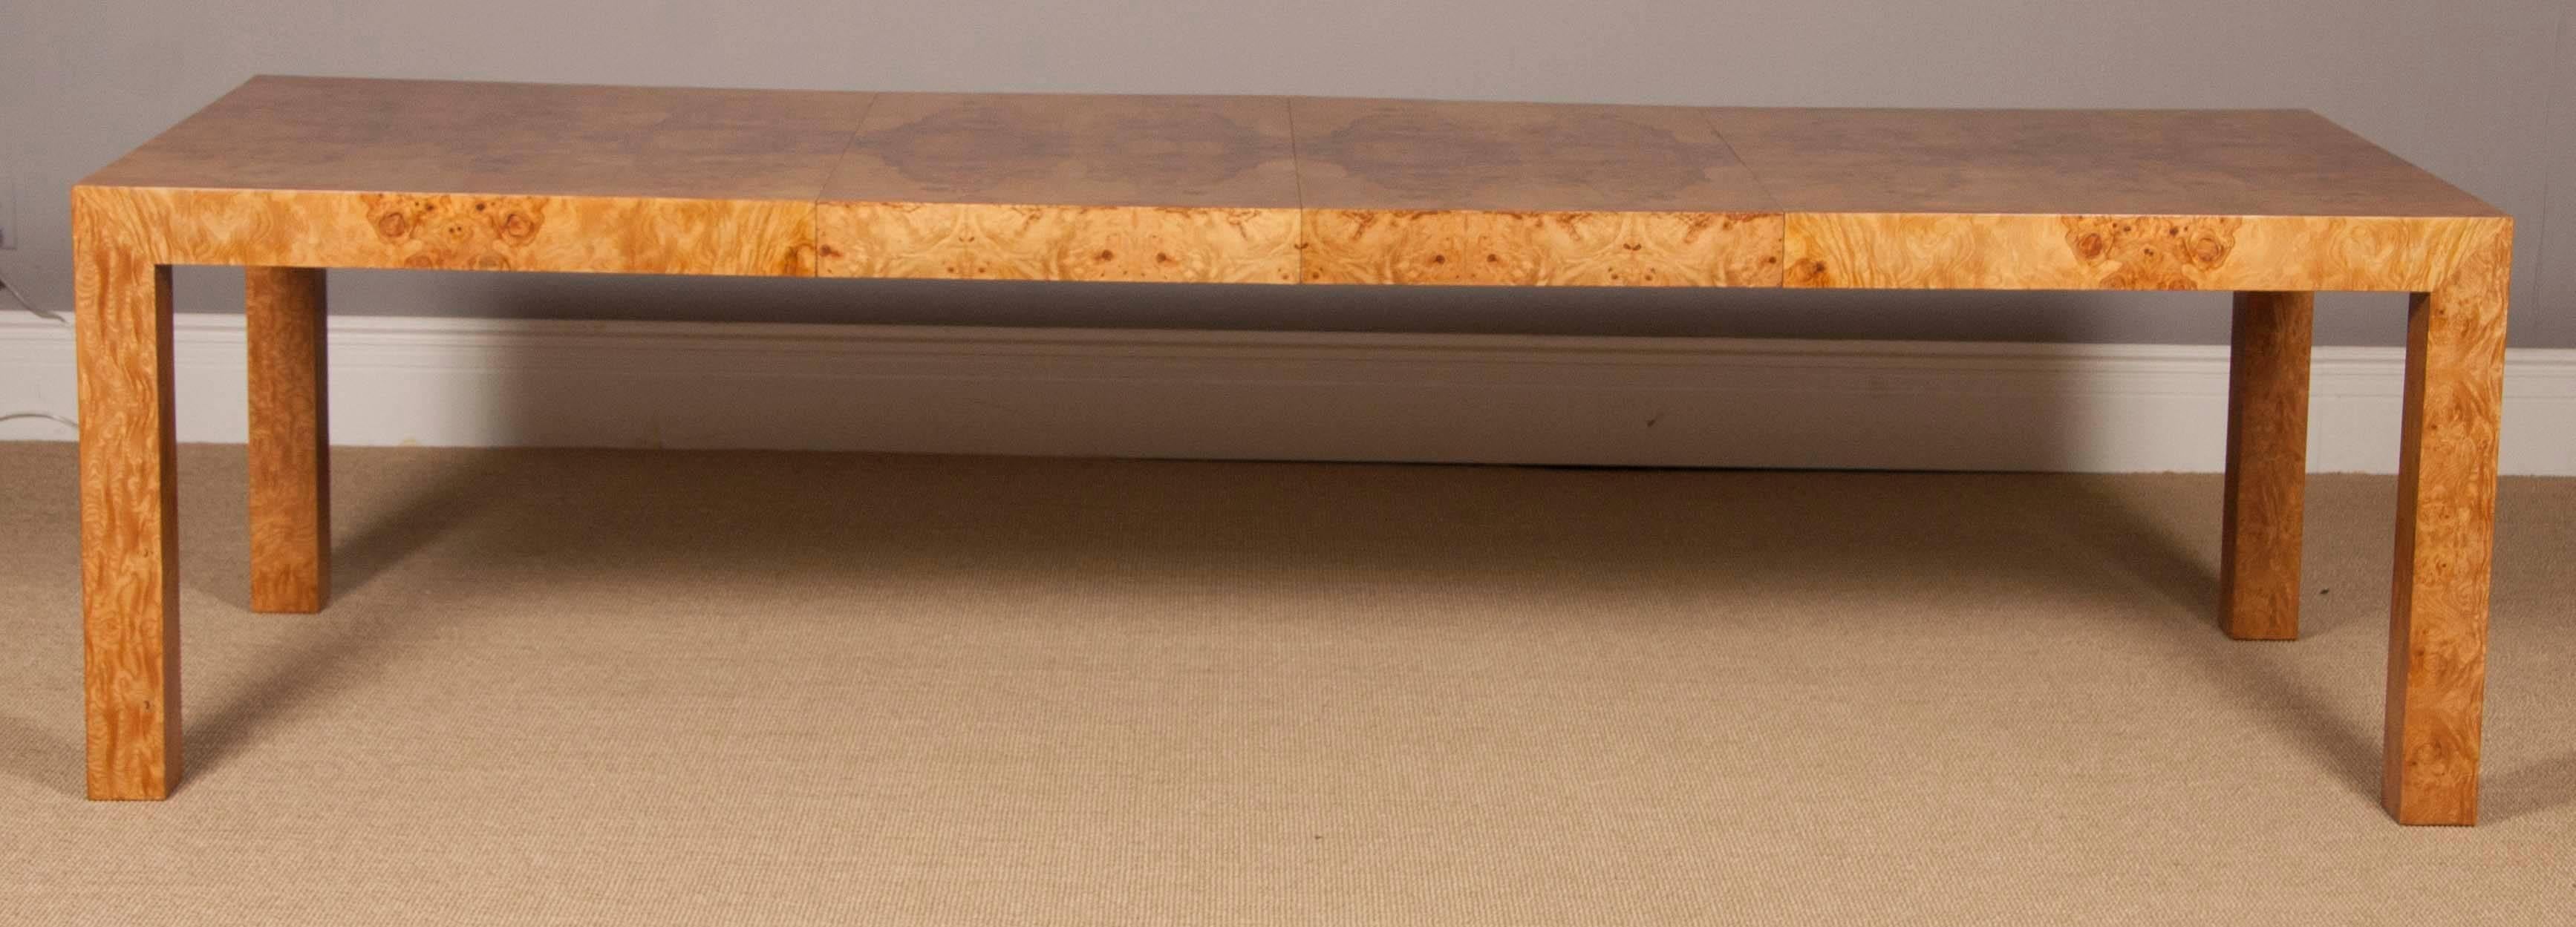 Laminated Parsons Style Olivewood Dining Table Designed by Milo Baughman